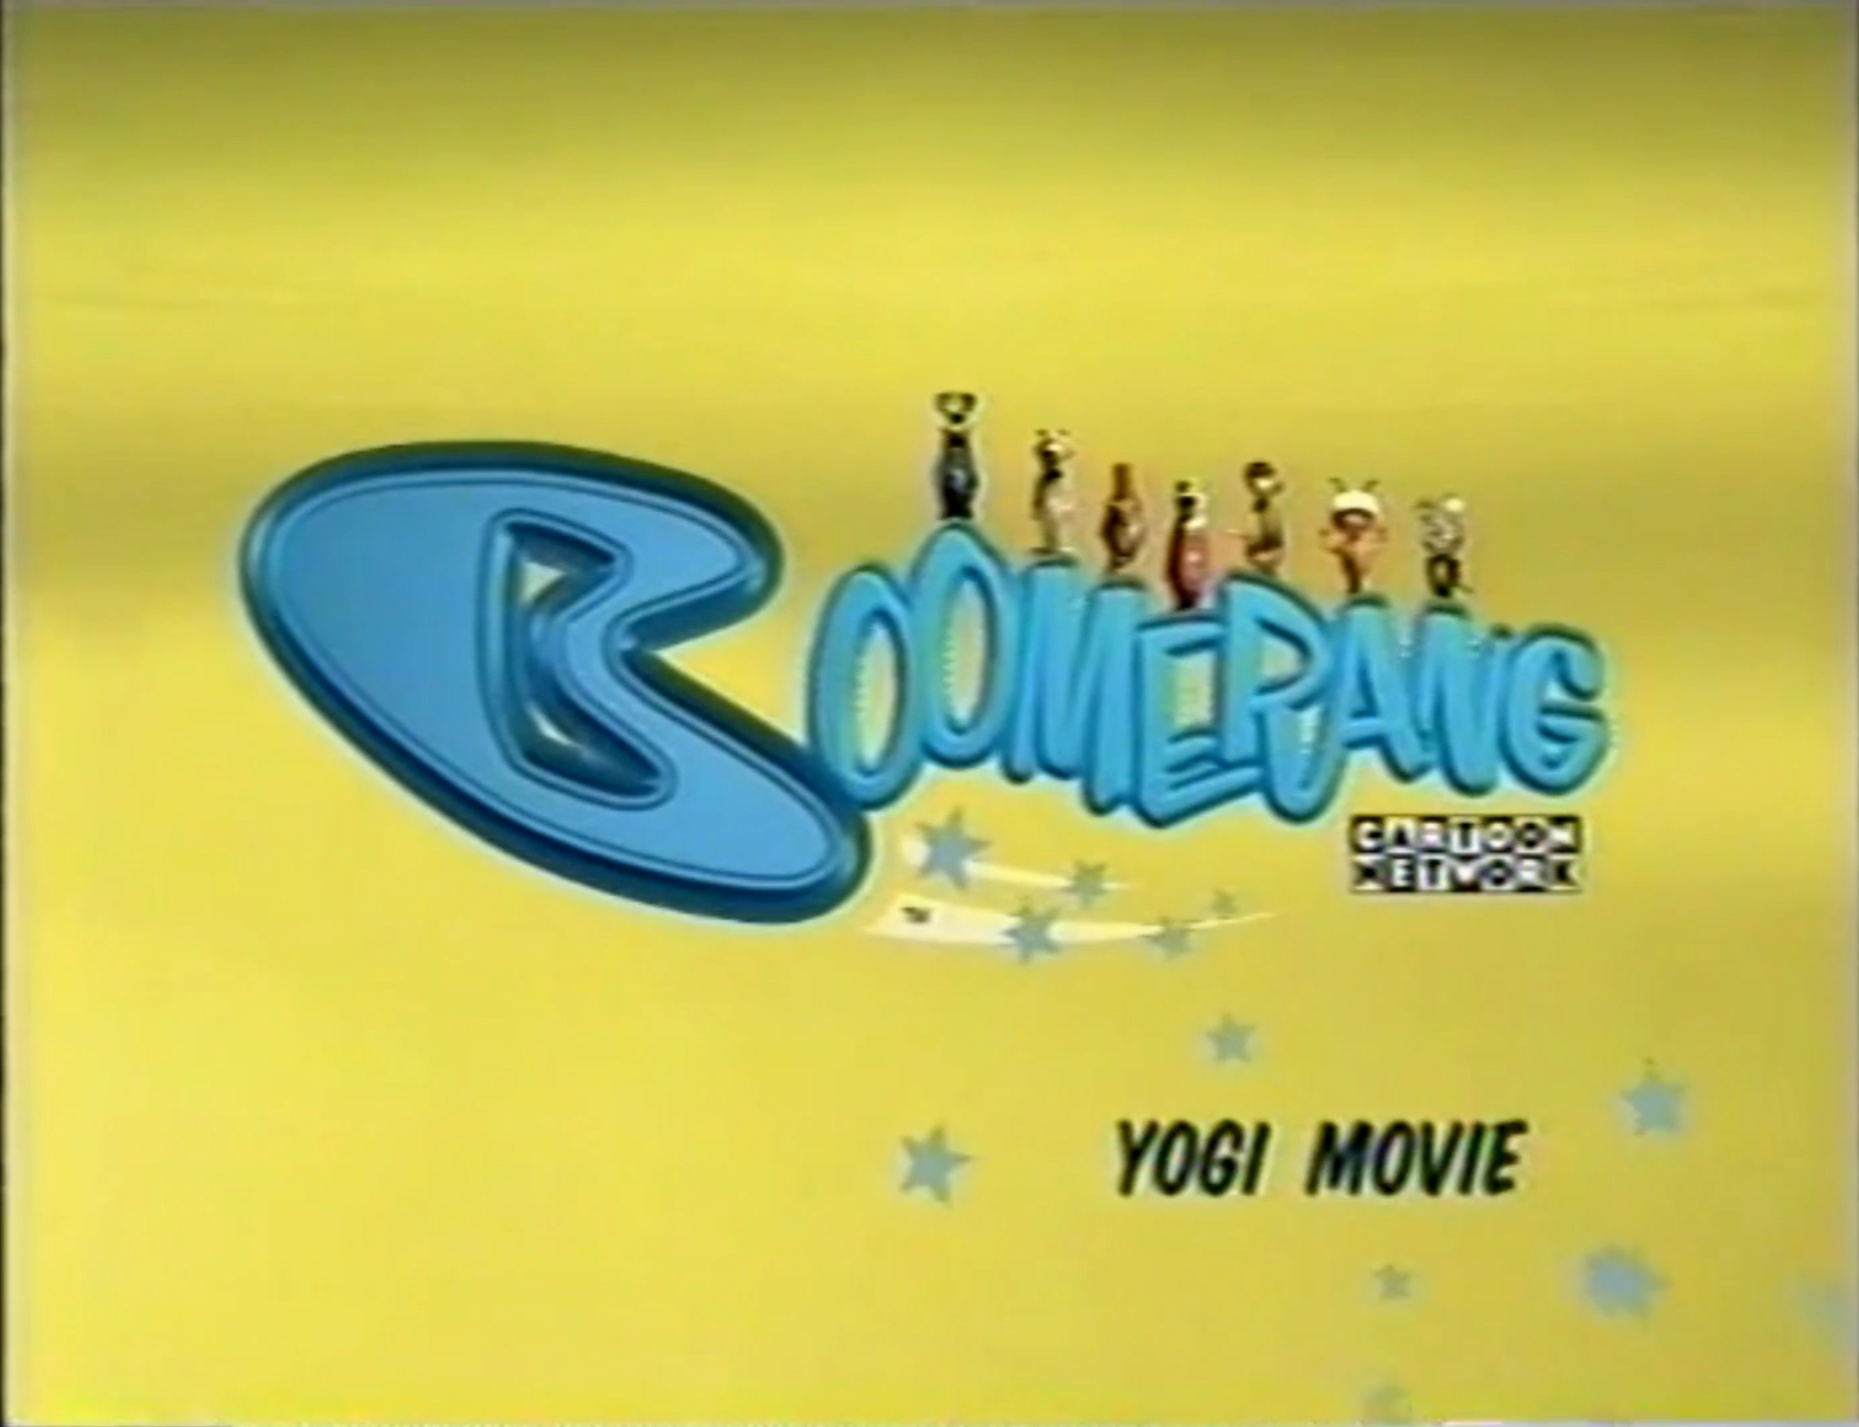 Scooberang bumpers - Boomerang USA (partially lost bumpers and promos from Cartoon Network spin-off channel; 2000-2015)